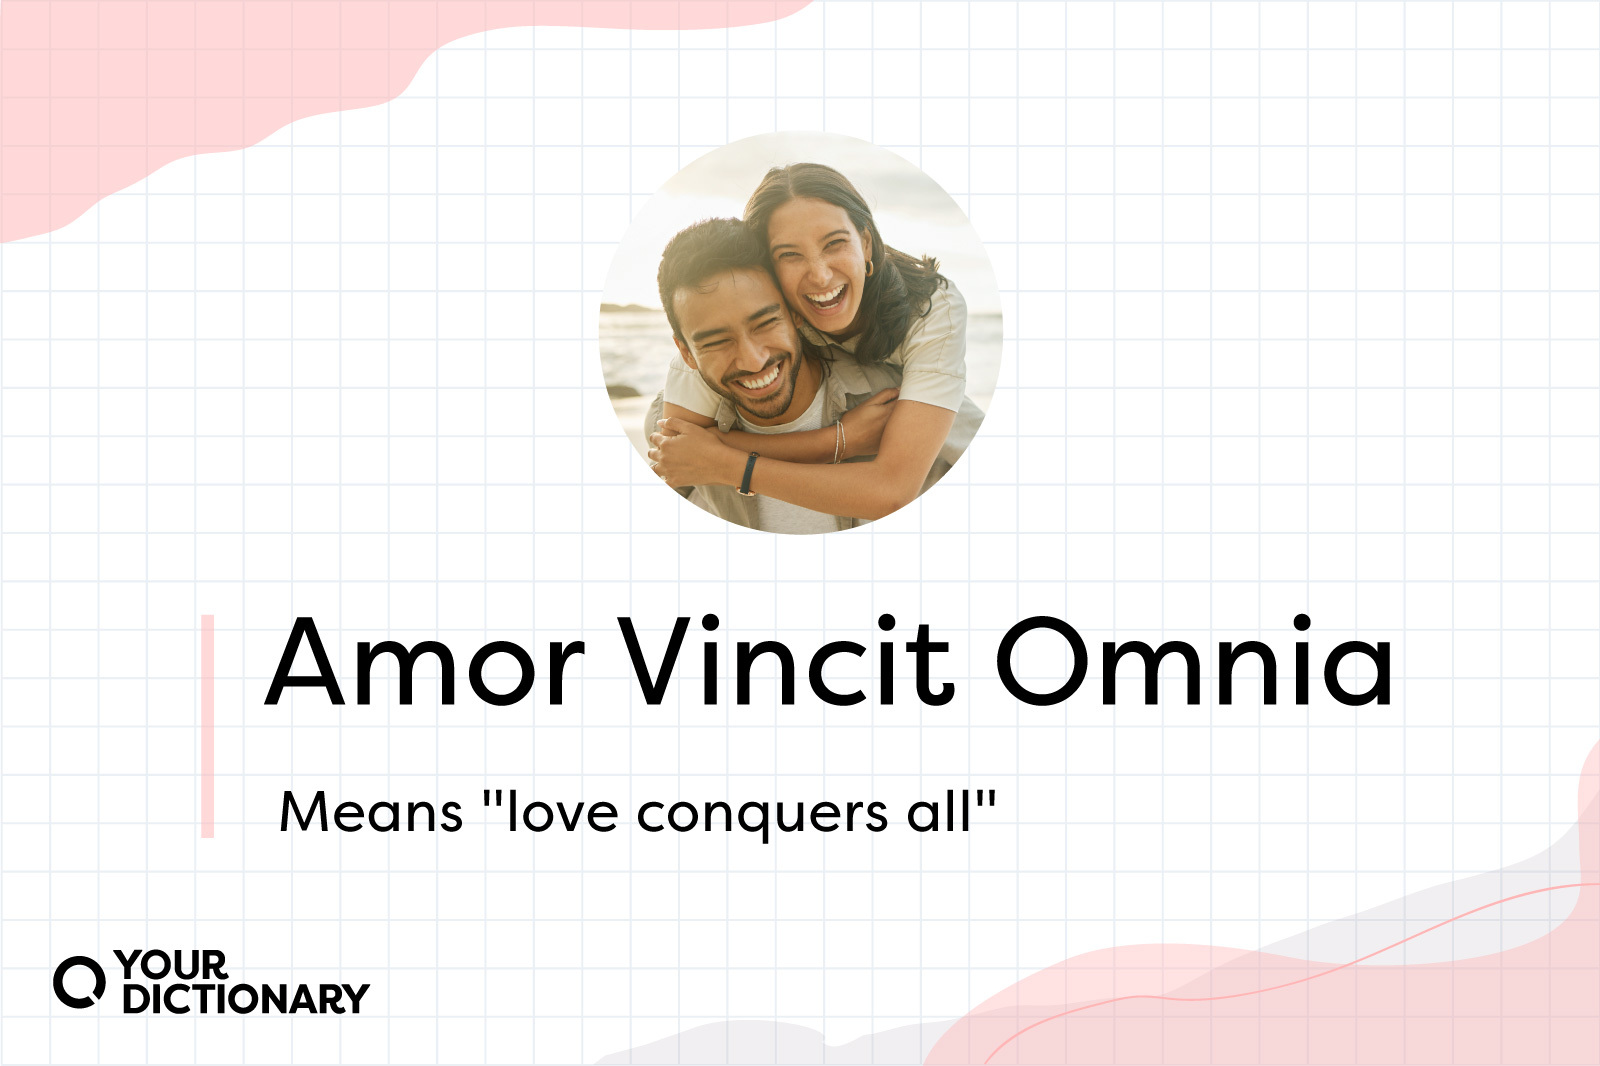 Couple With Latin Words "Amor Vincit Omnia" and Meaning